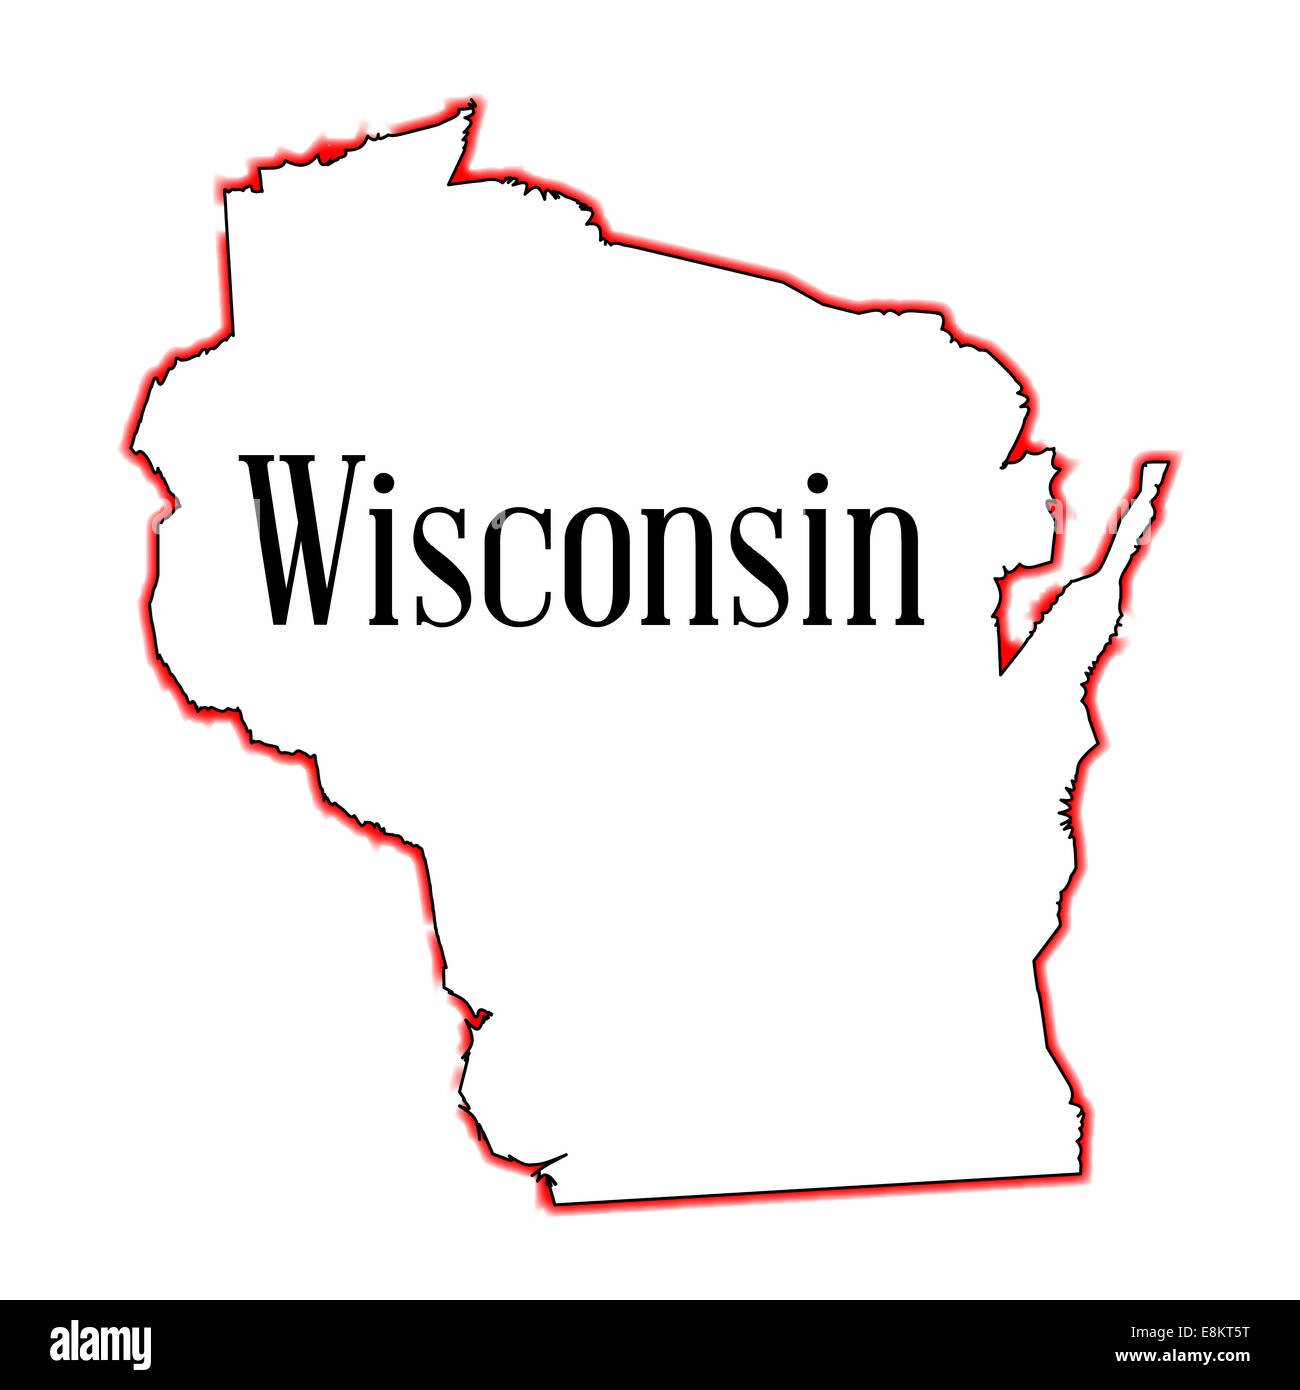 Outline map of the American state of Wisconsin Stock Photo